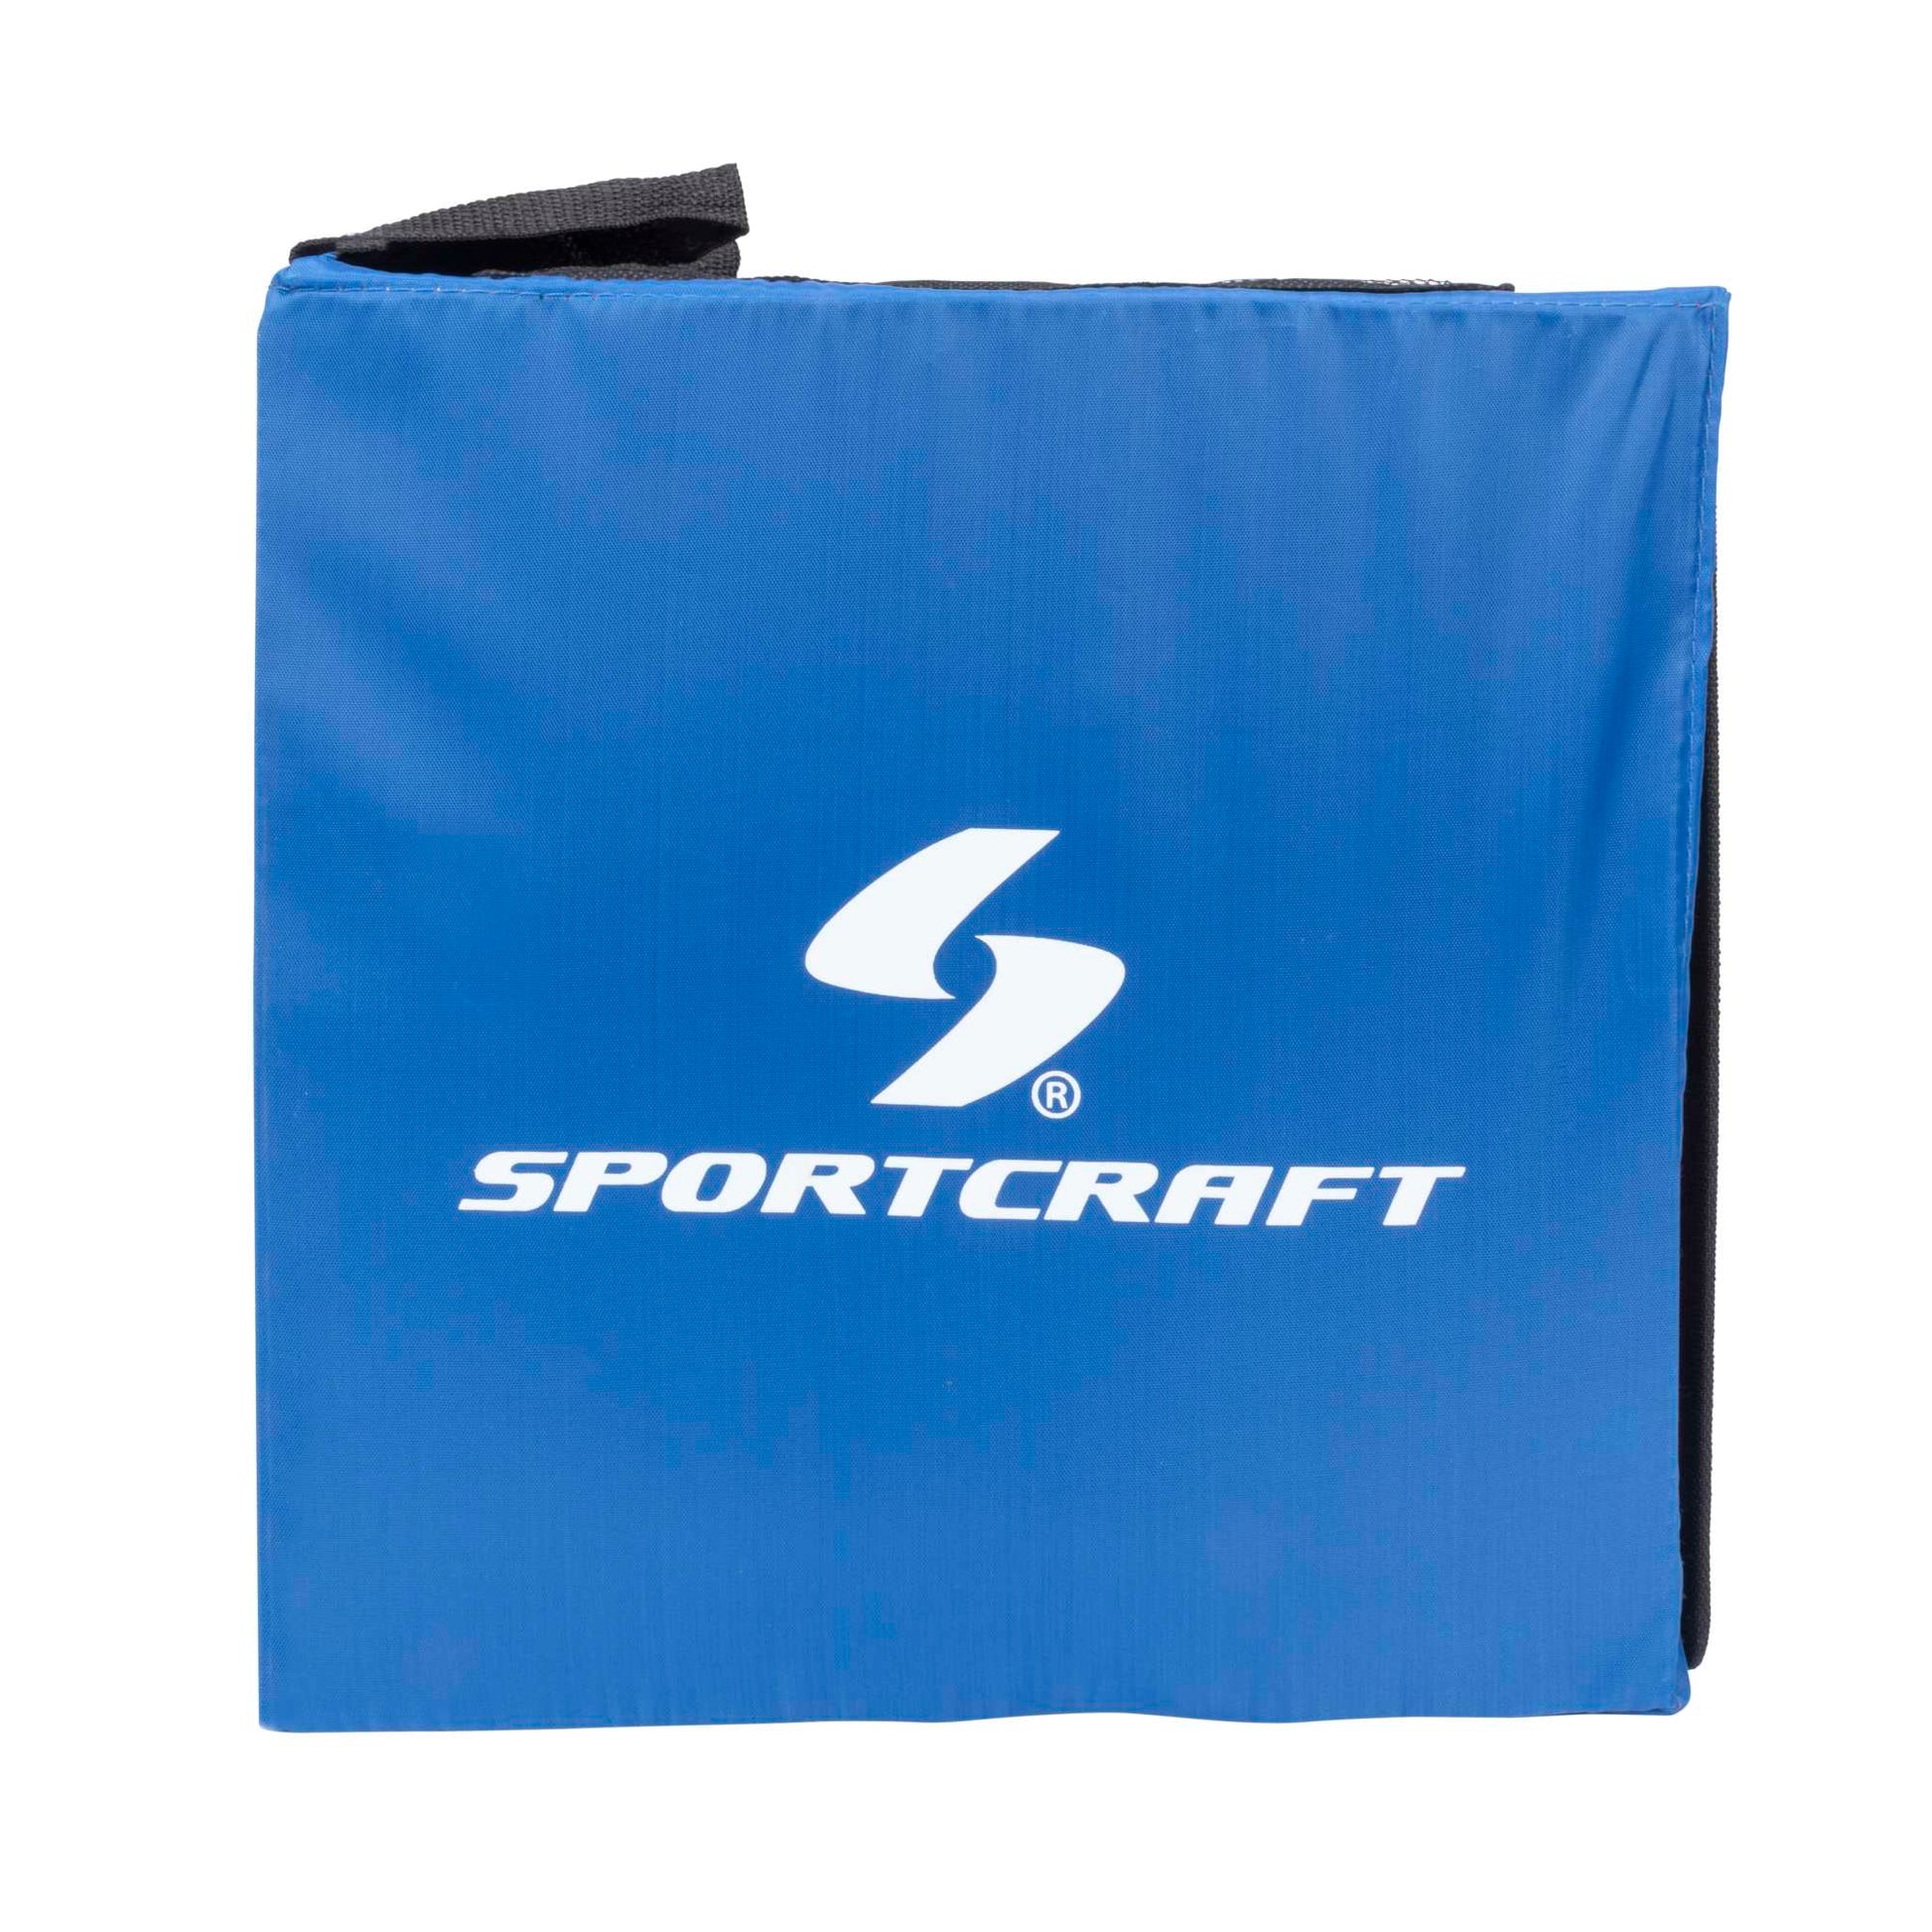 Sportcraft Washer Toss Portable game, Product Image, Showing side of product